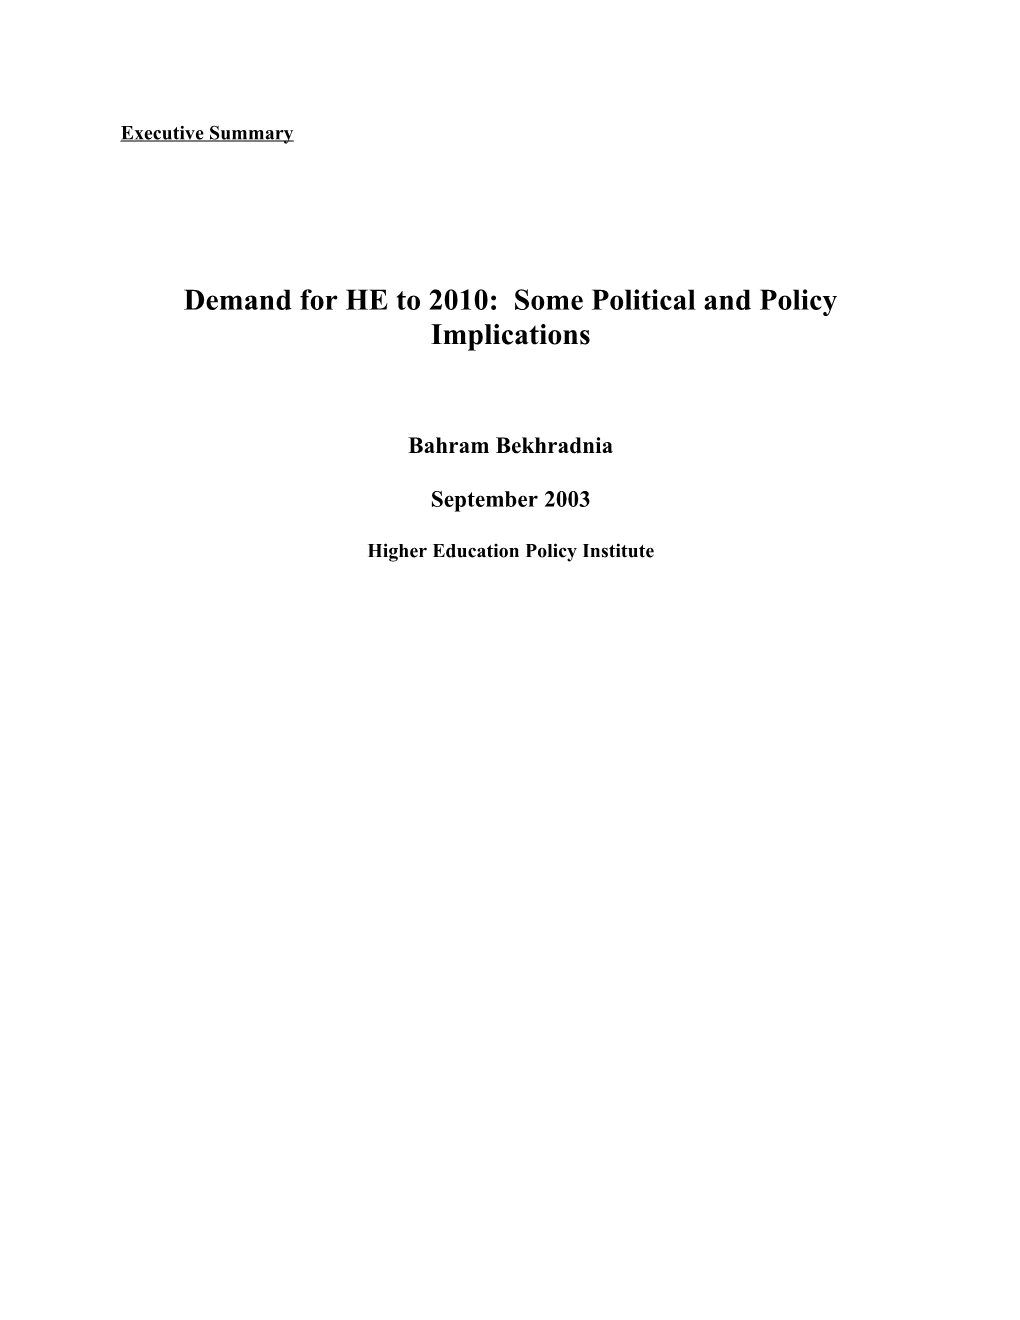 Demand for HE to 2010: Some Political and Policy Implications